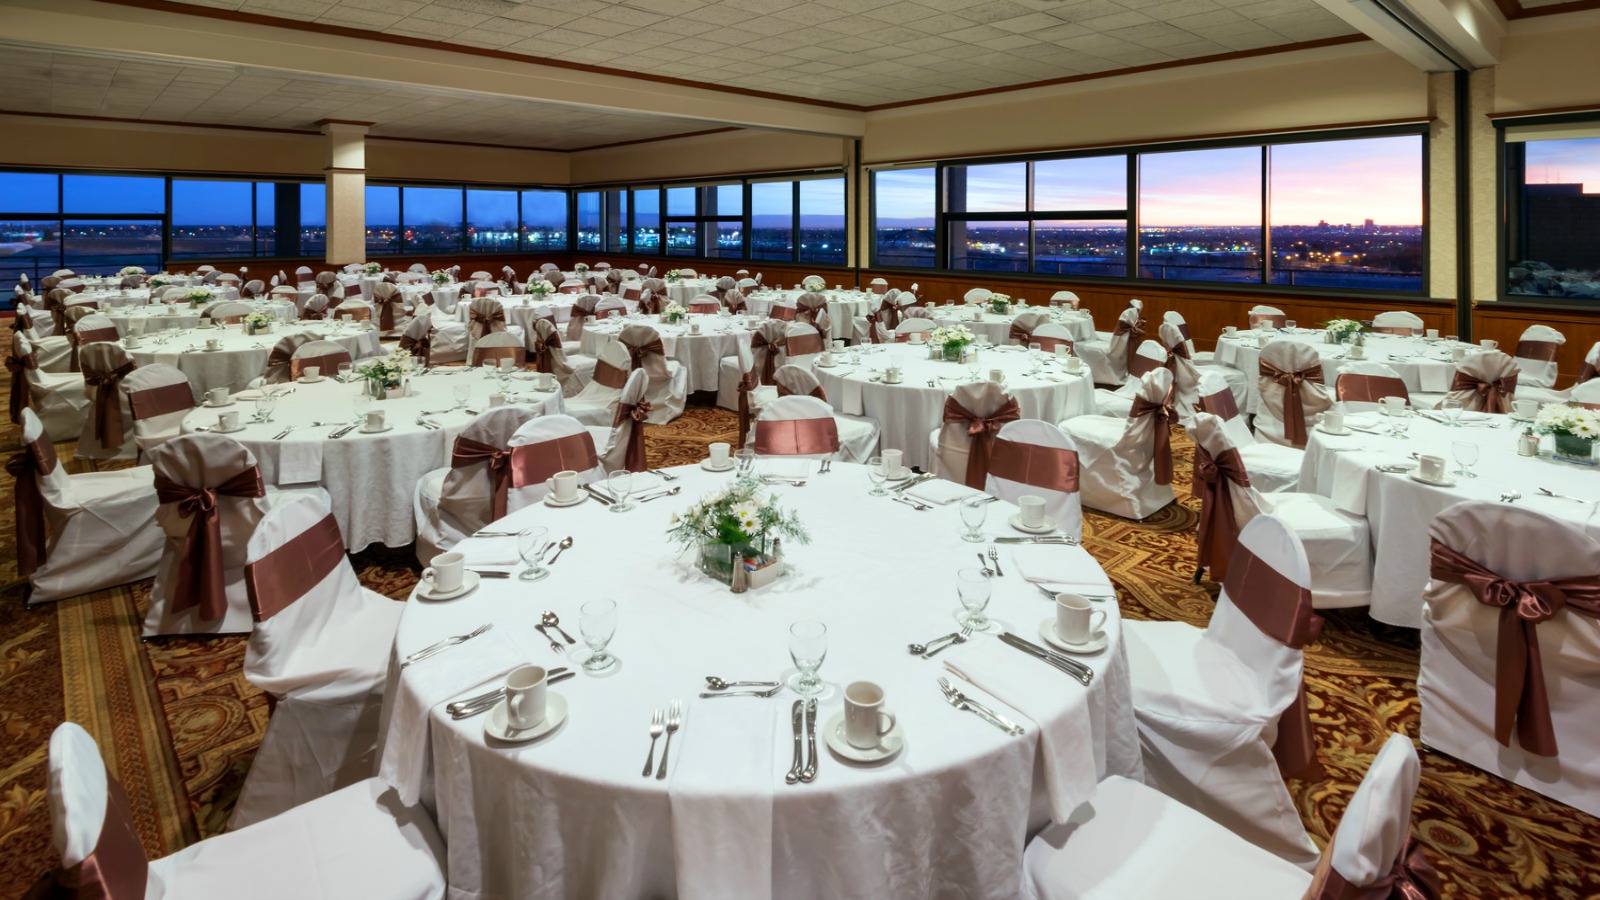 Great Wedding Reception Venues Denver Co of all time The ultimate guide 